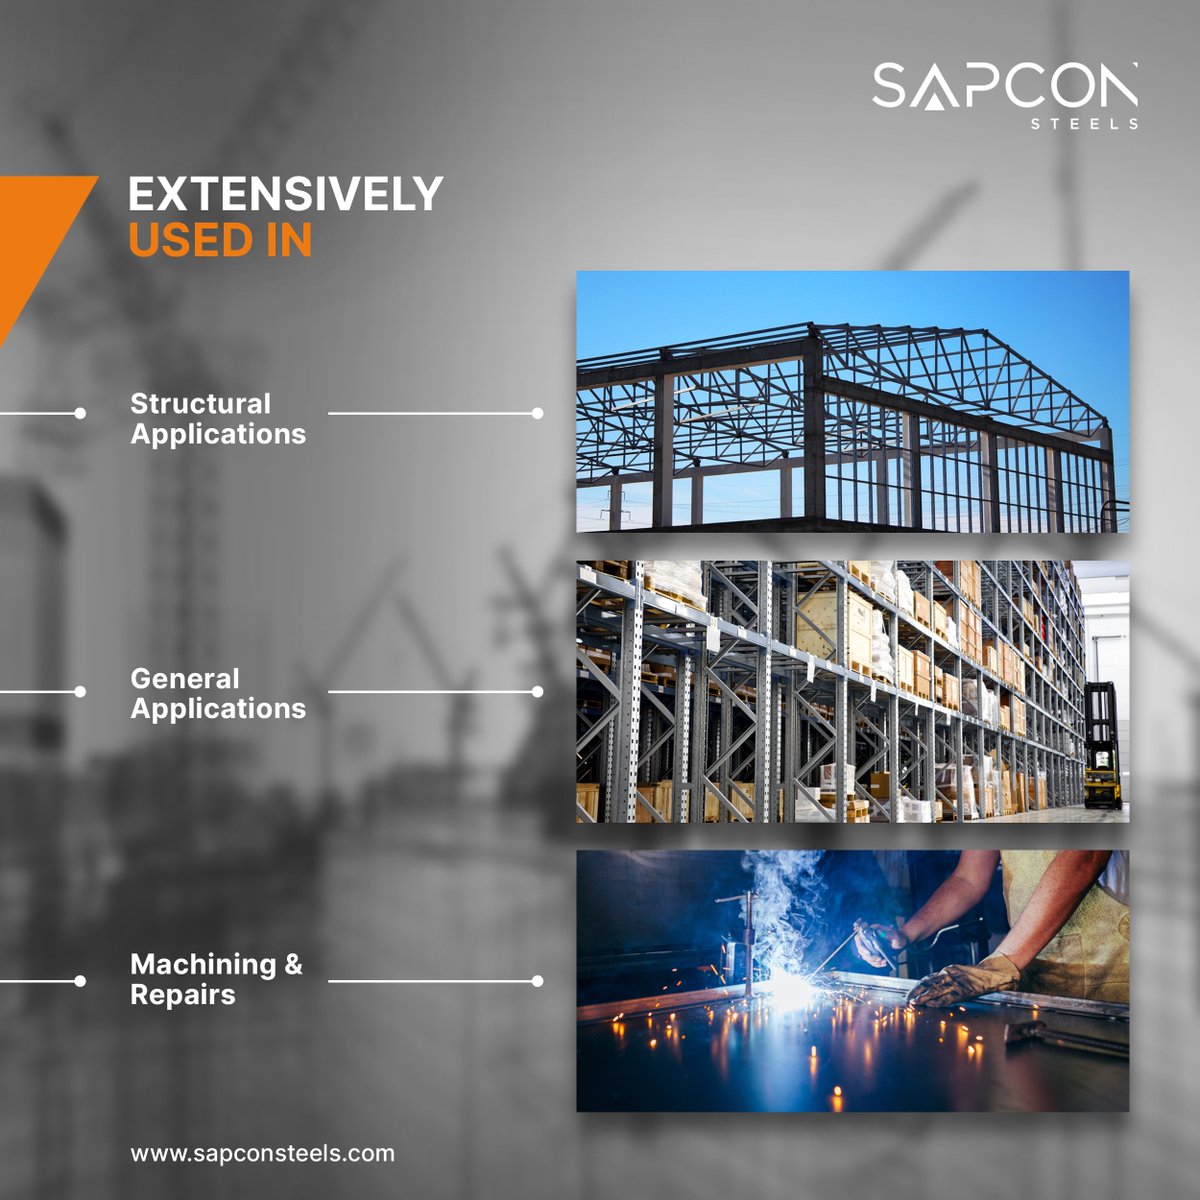 At Sapcon Steels, we provide mild steel angles of diverse sizes & grades across India. These MS angles supplied by us find utility in structural applications, general applications, machining & repairs.

#SapconSteels #MildSteelAngles #SteelSupplierInIndia #Sourcesmartersteels